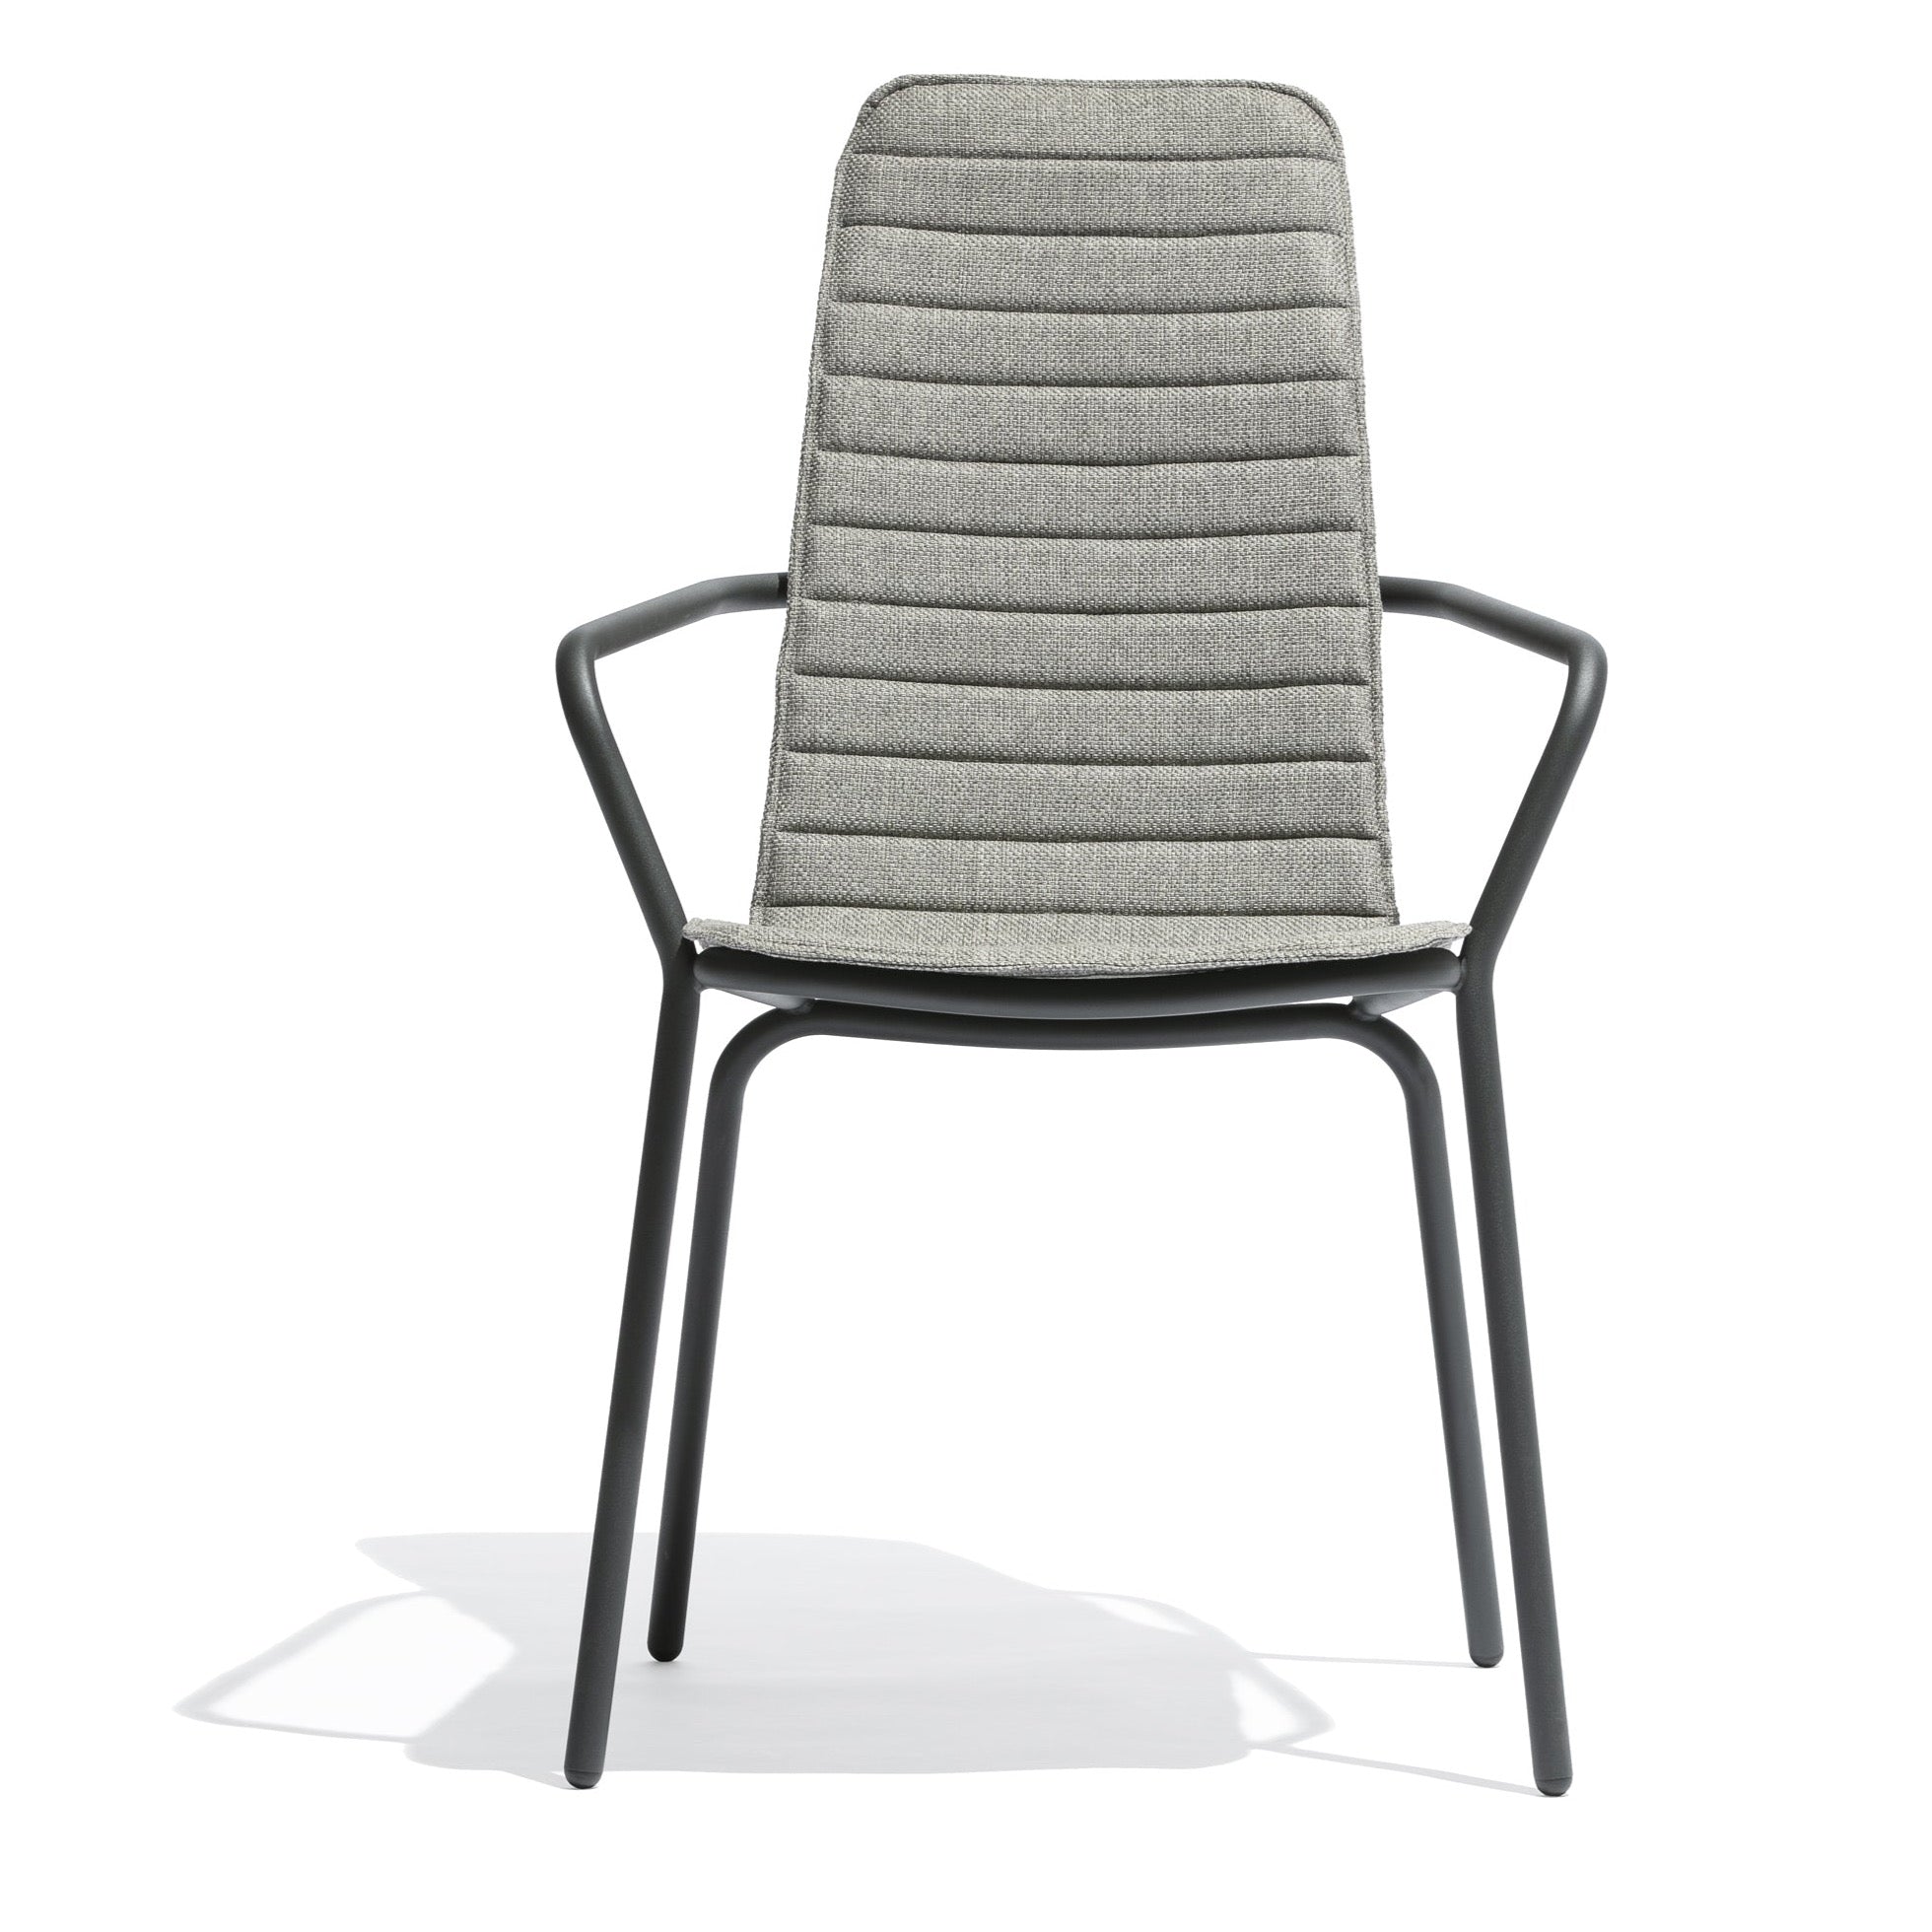 Todus Starling high back armchair